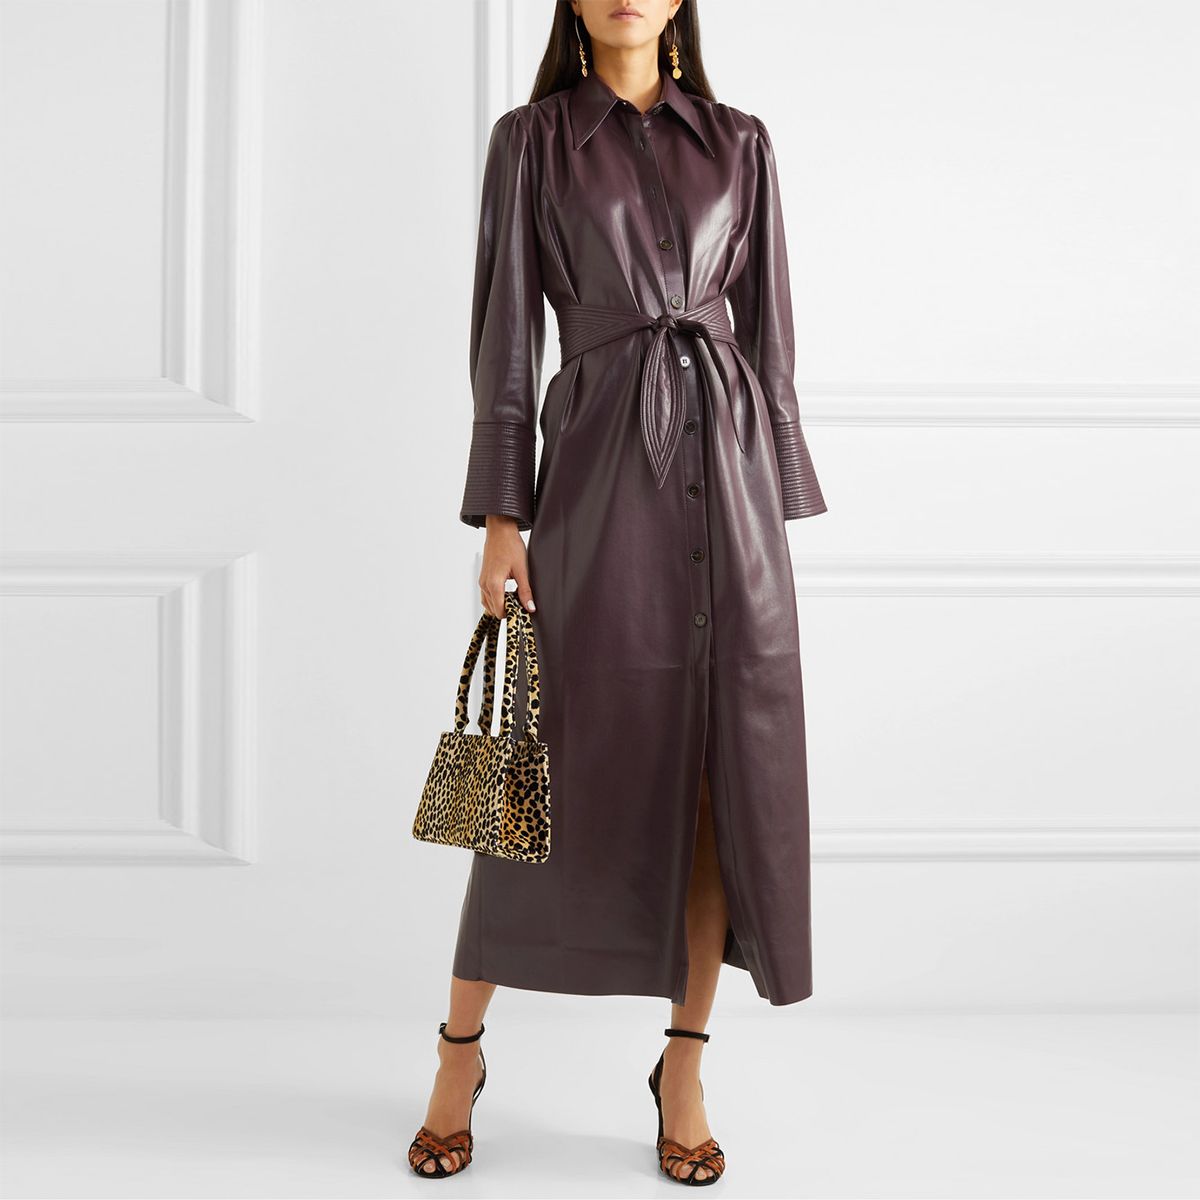 33 Stylish Winter Dresses From the Coolest Brands | Who What Wear